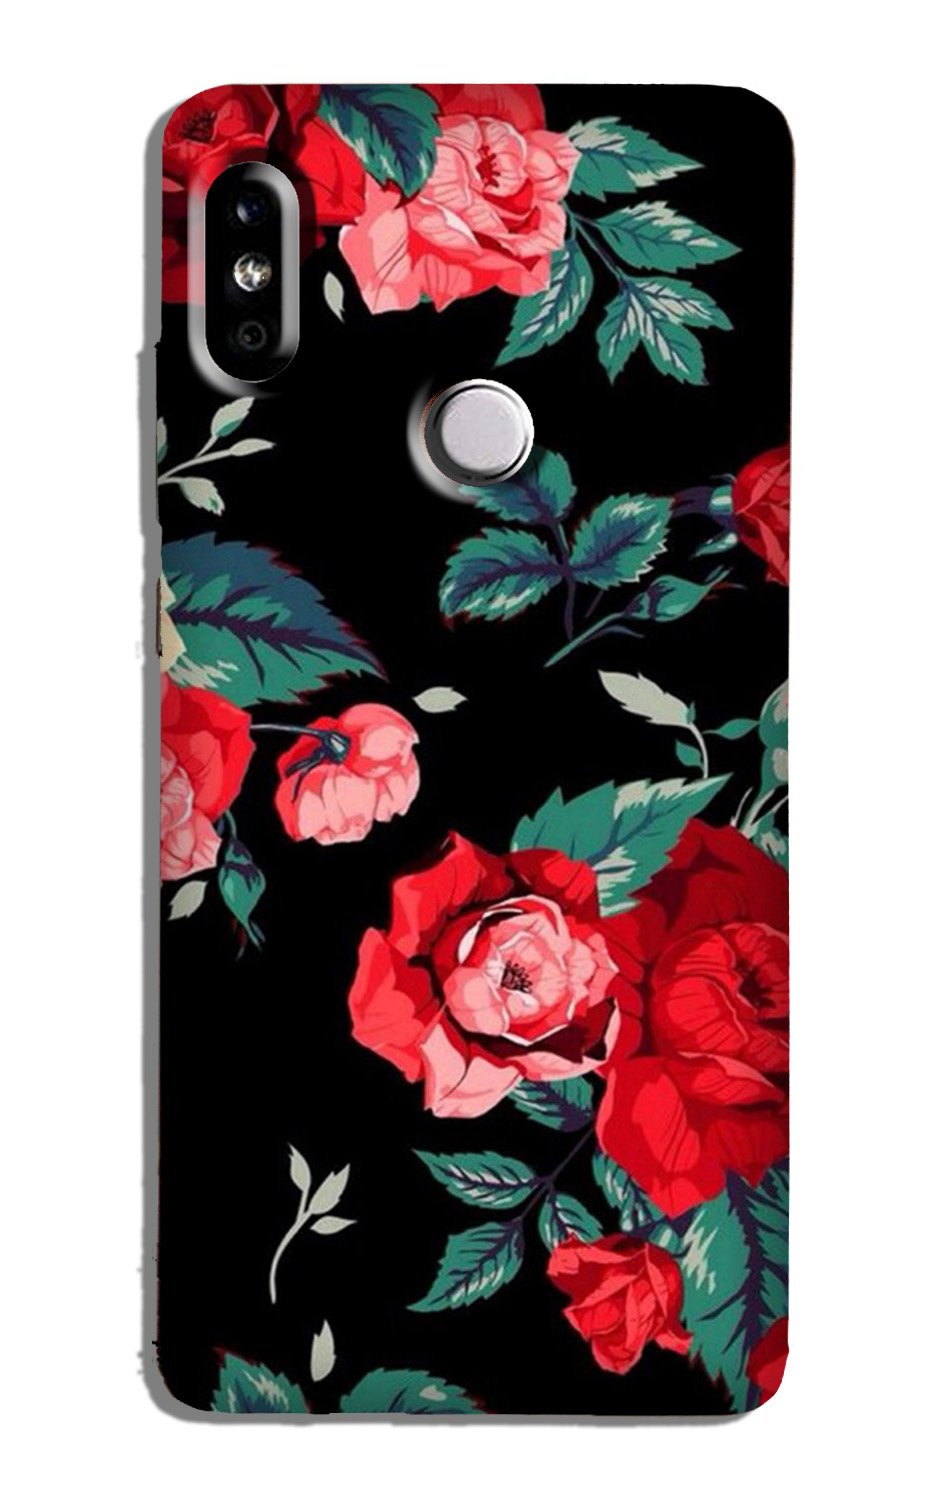 Red Rose Case for Redmi Note 5 Pro